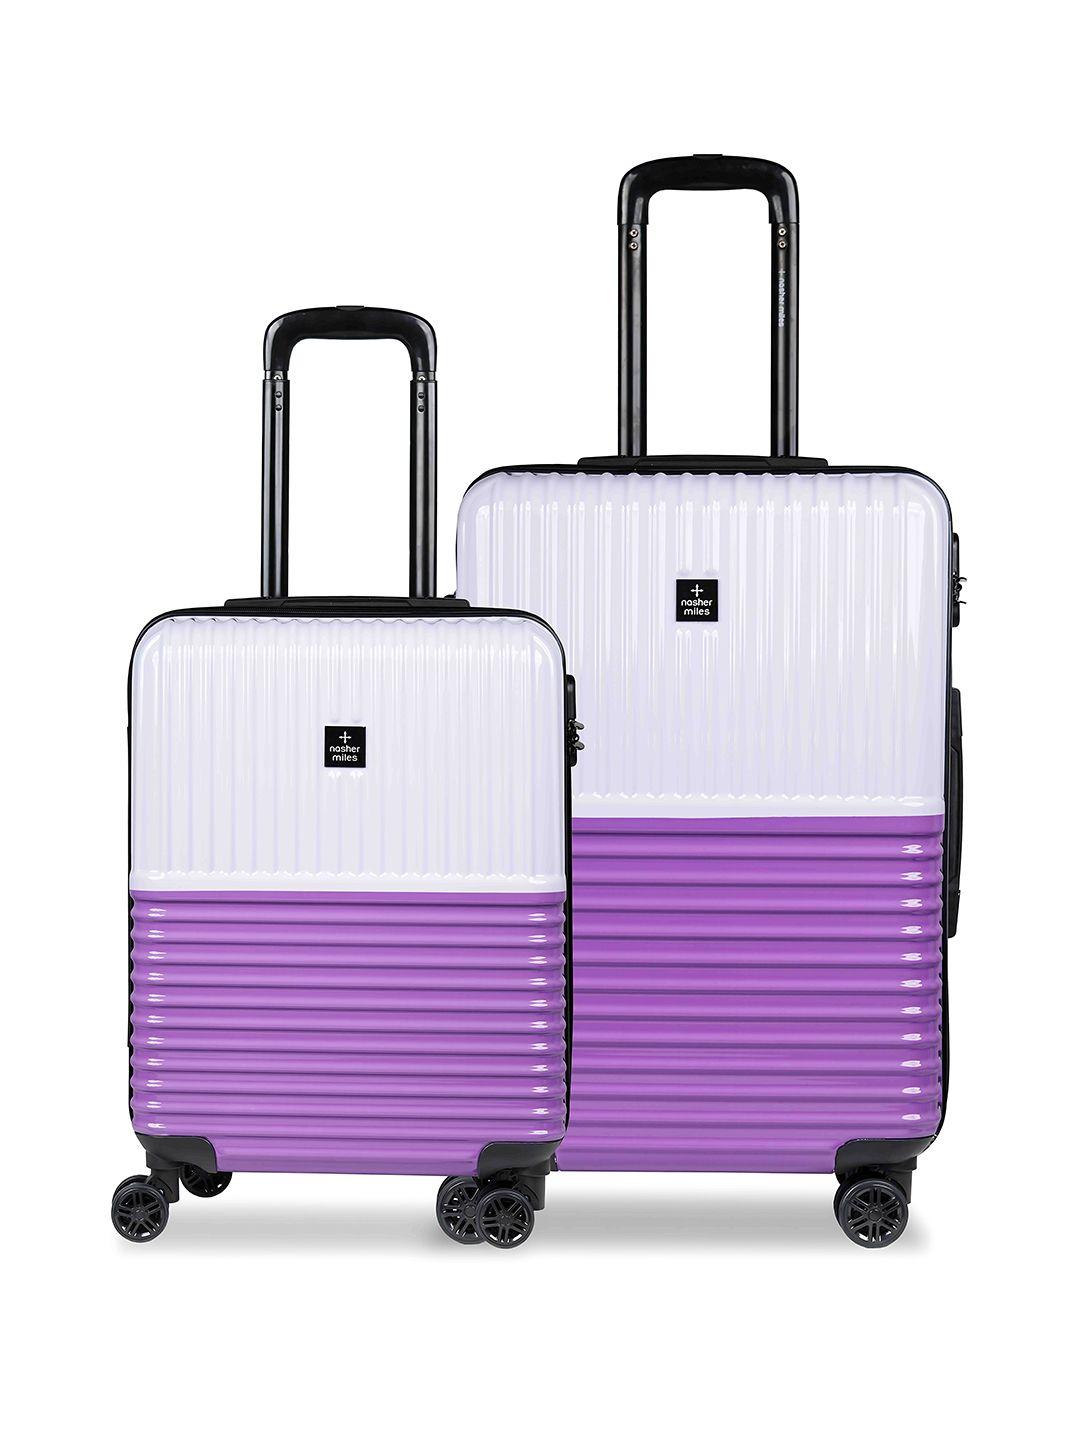 nasher miles set of 2 cabin trolley suitcases